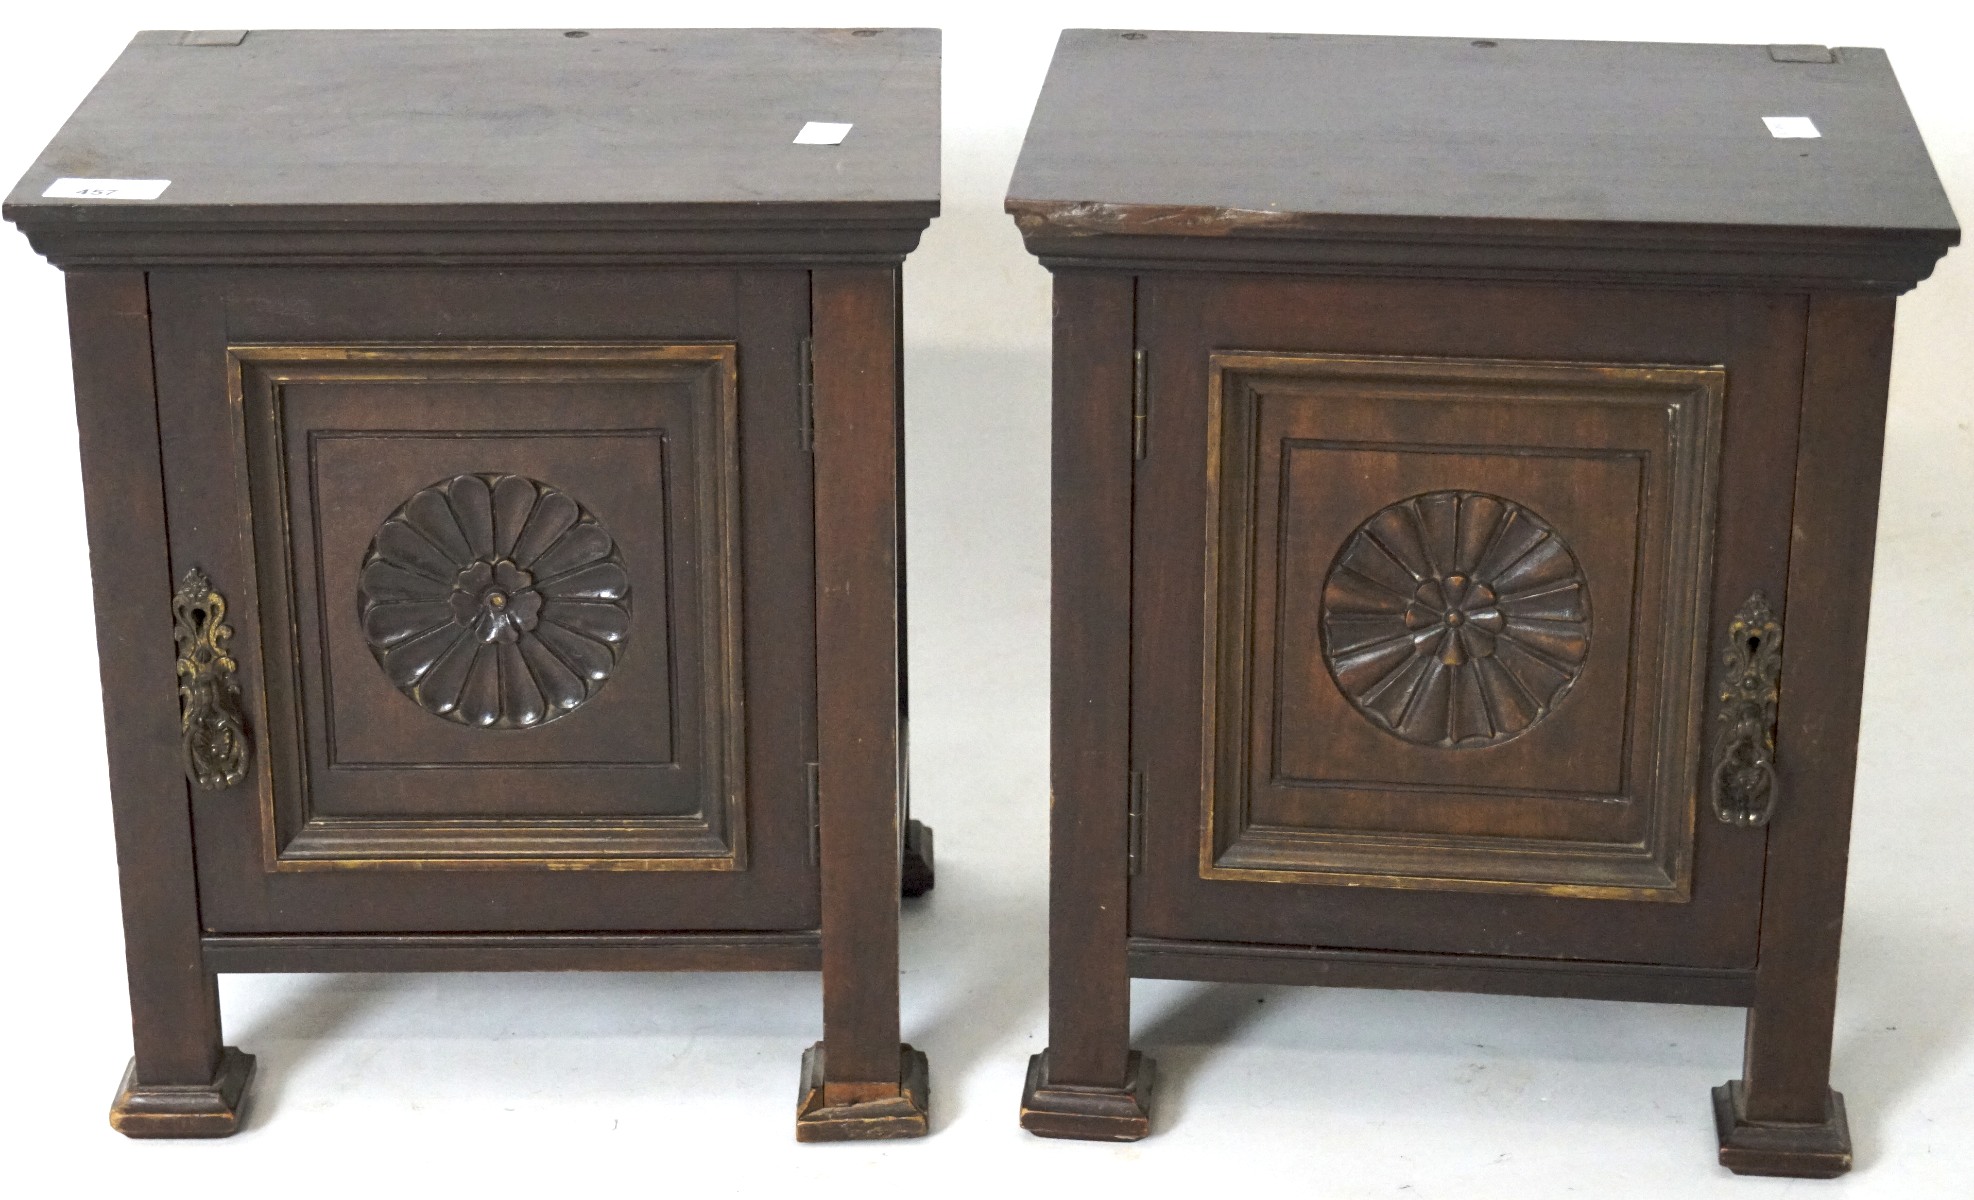 A pair of small wooden cupboards, both with panelled doors carved with flowers L30.5cm x D23.